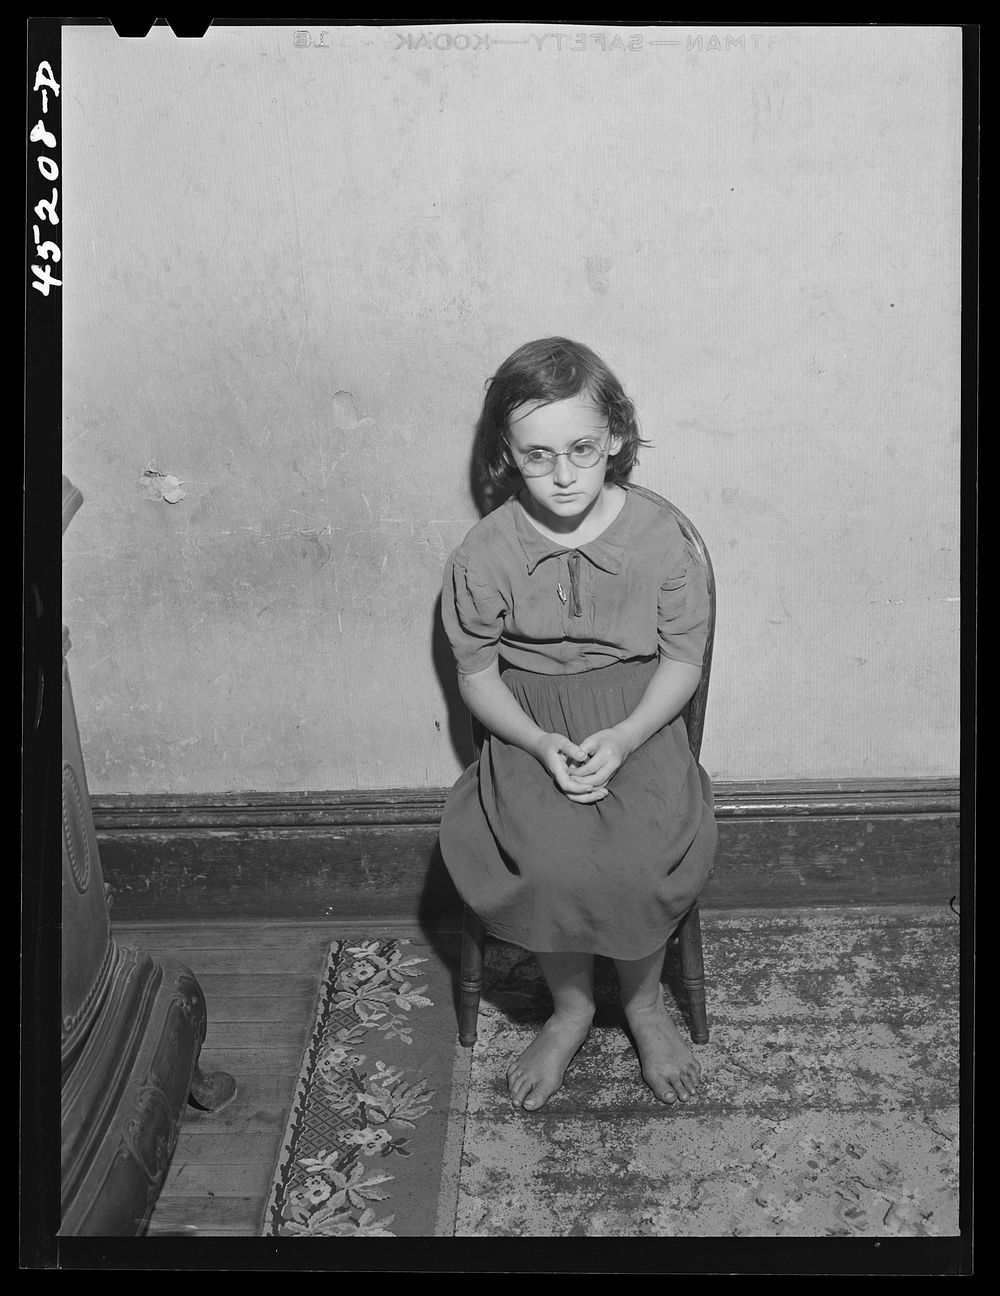 [Untitled photo, possibly related to: One of the children of Albert Lynch, FSA (Farm Security Administration) dairy farmer…